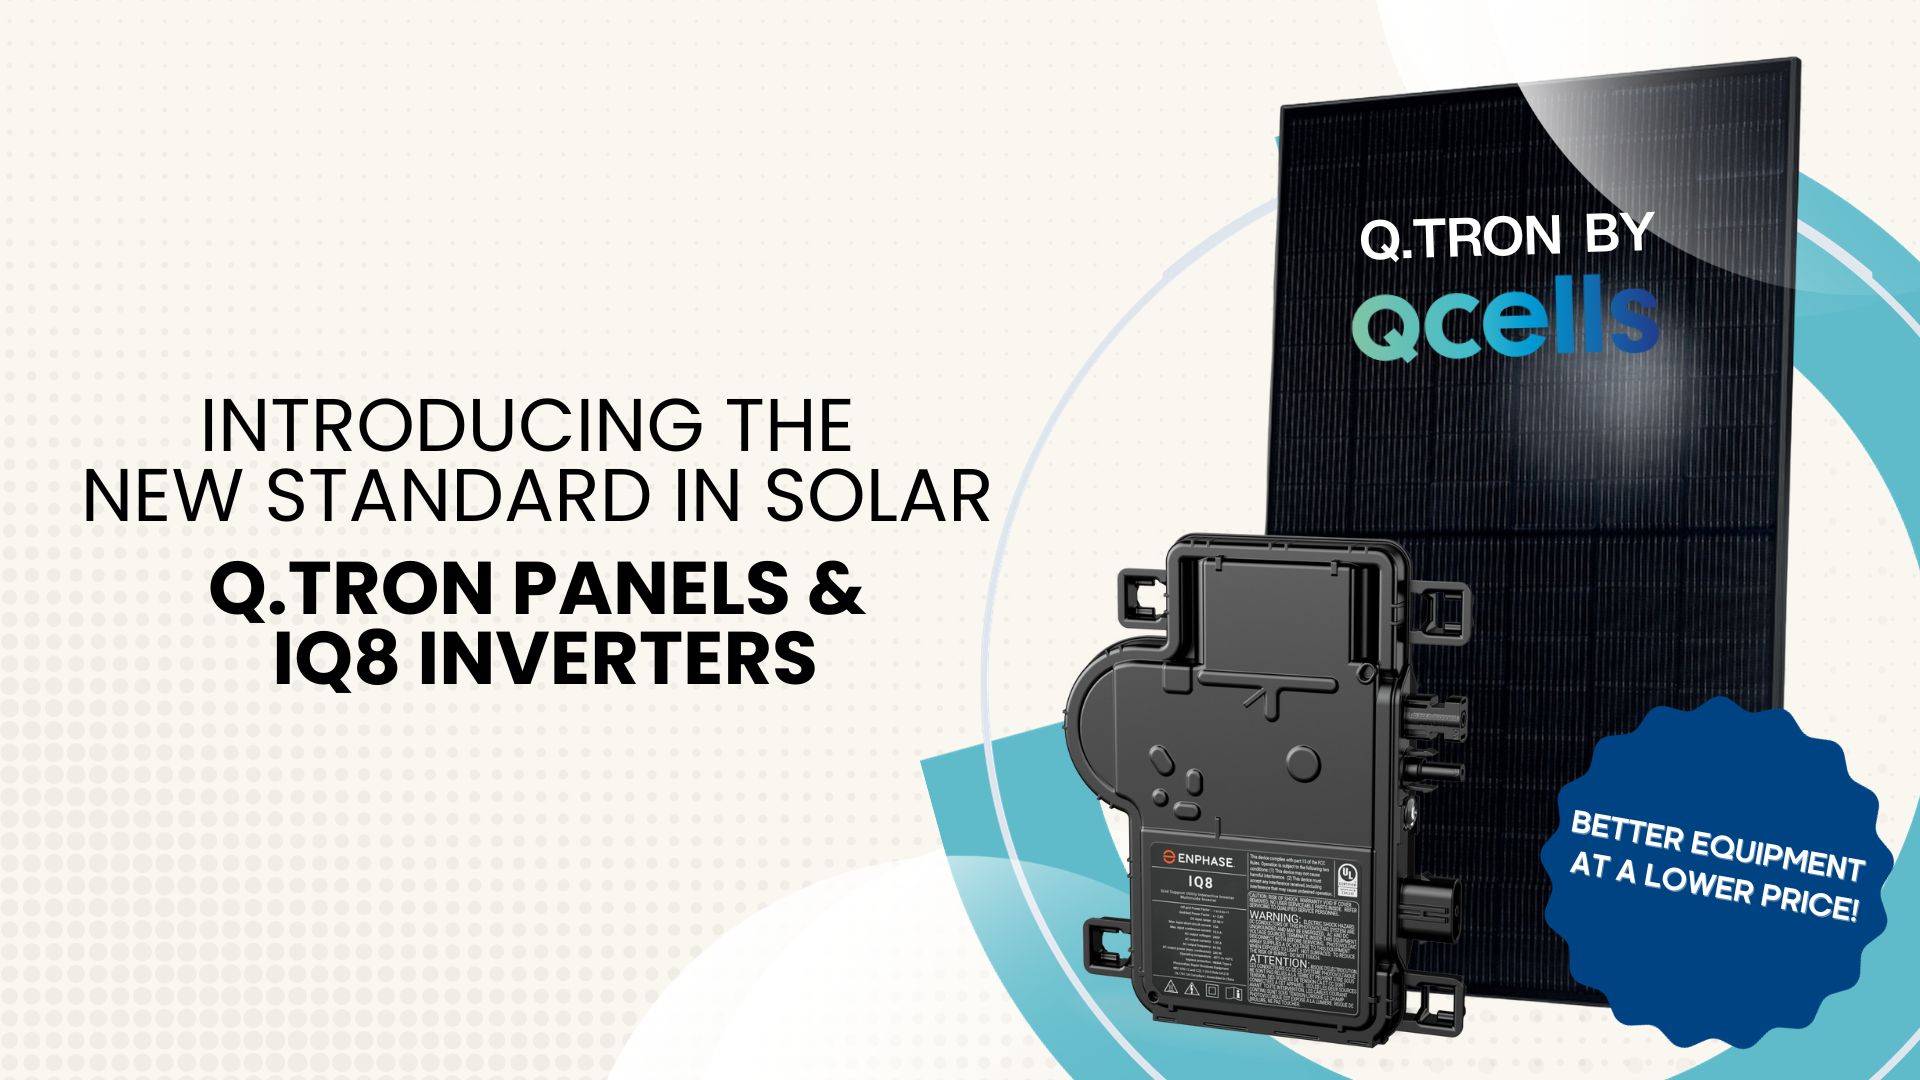 The new standards in solar: Qcells panels and Enphase inverters